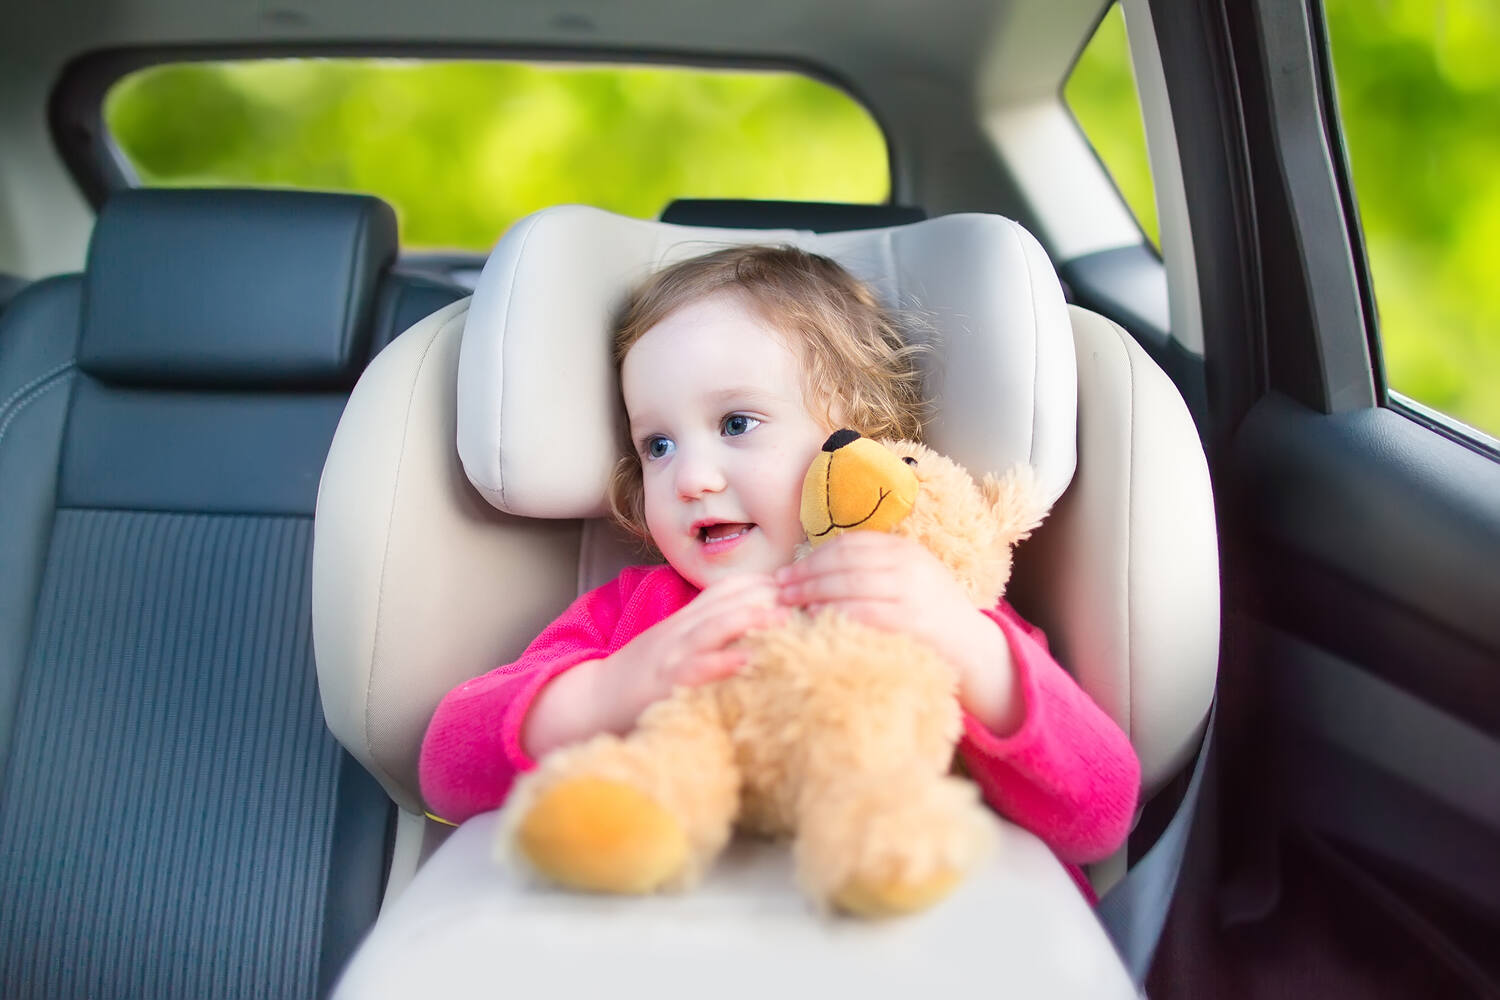 Take your toddler's toys while traveling